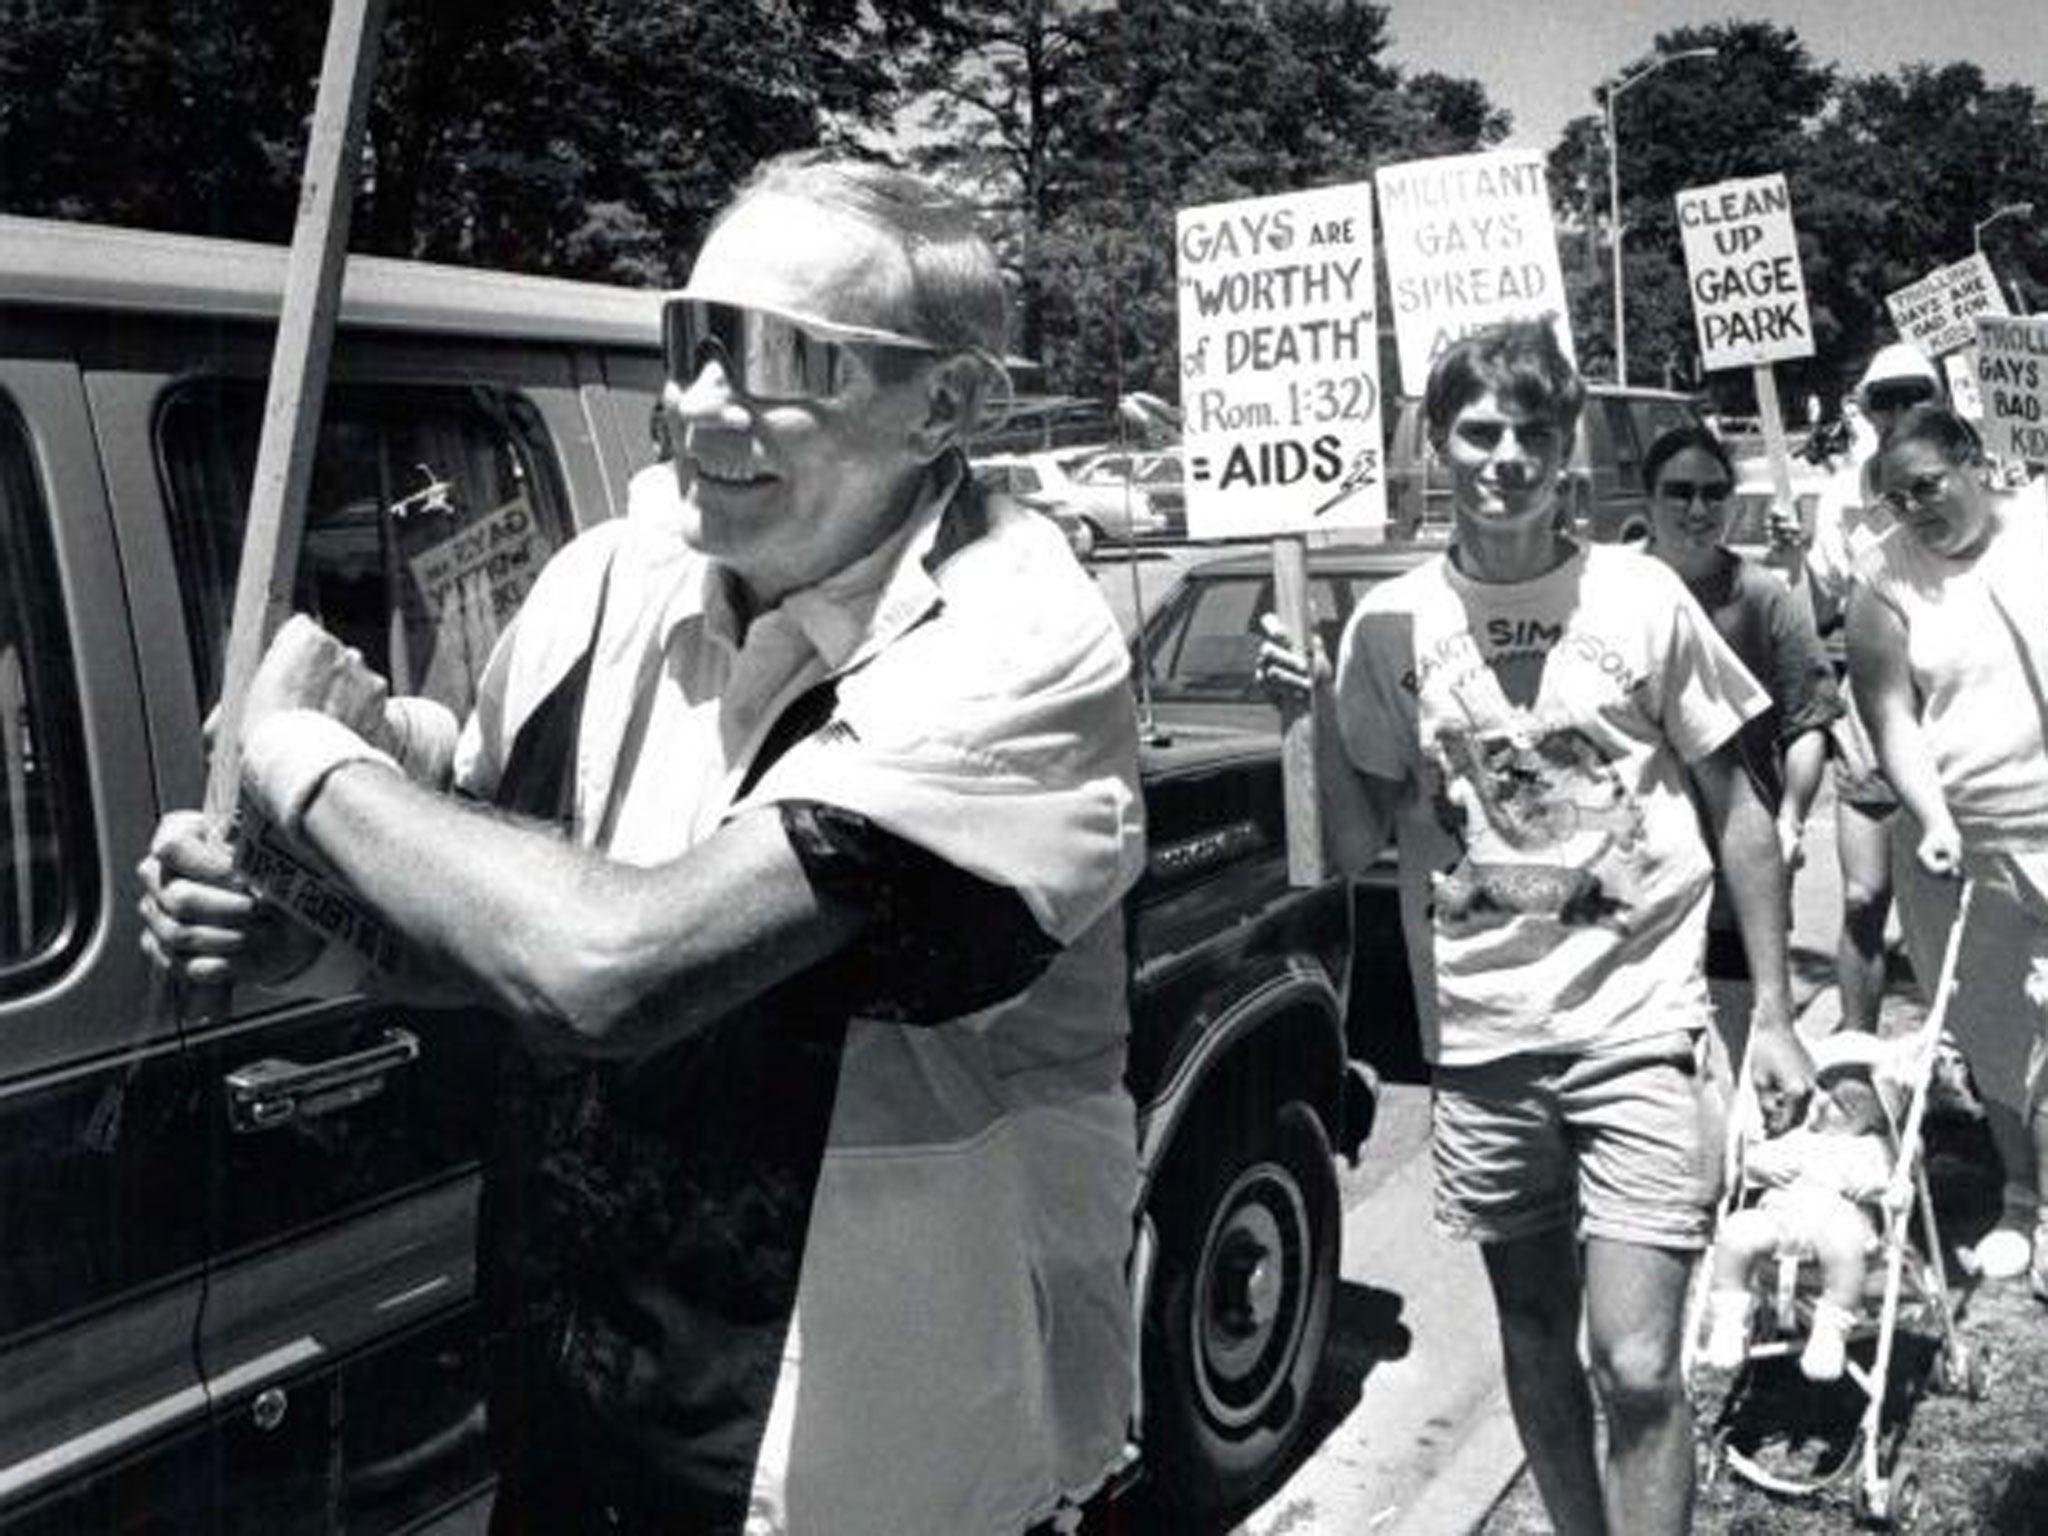 Phelps and members of his Westboro church stage a protest in Topeka, Kansas in 1991